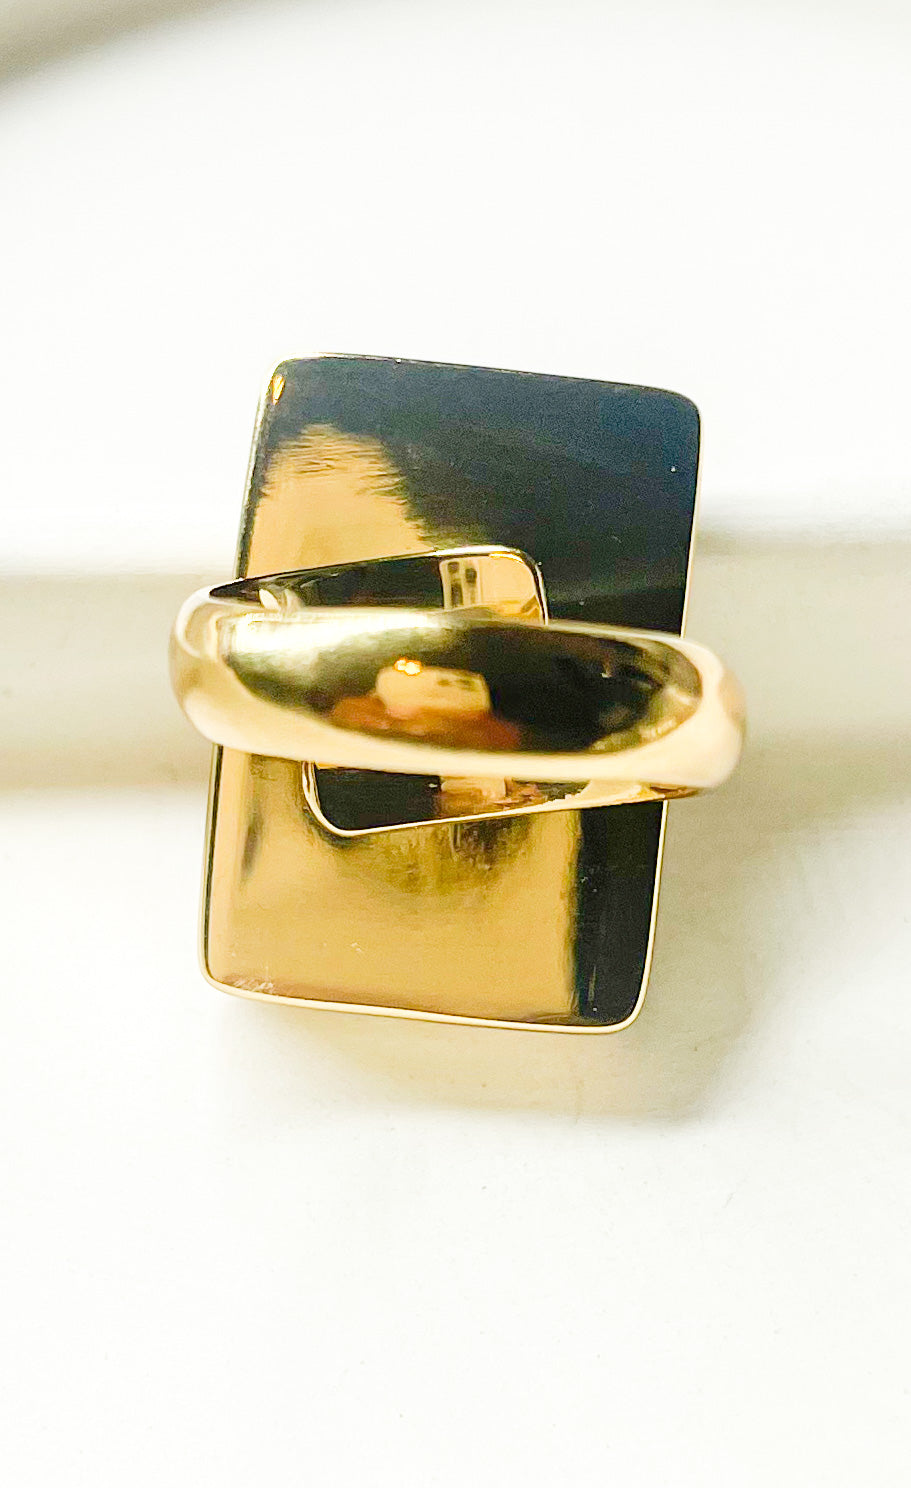 Load image into Gallery viewer, Jack of Clubs Bone Card Ring - Alchemia
